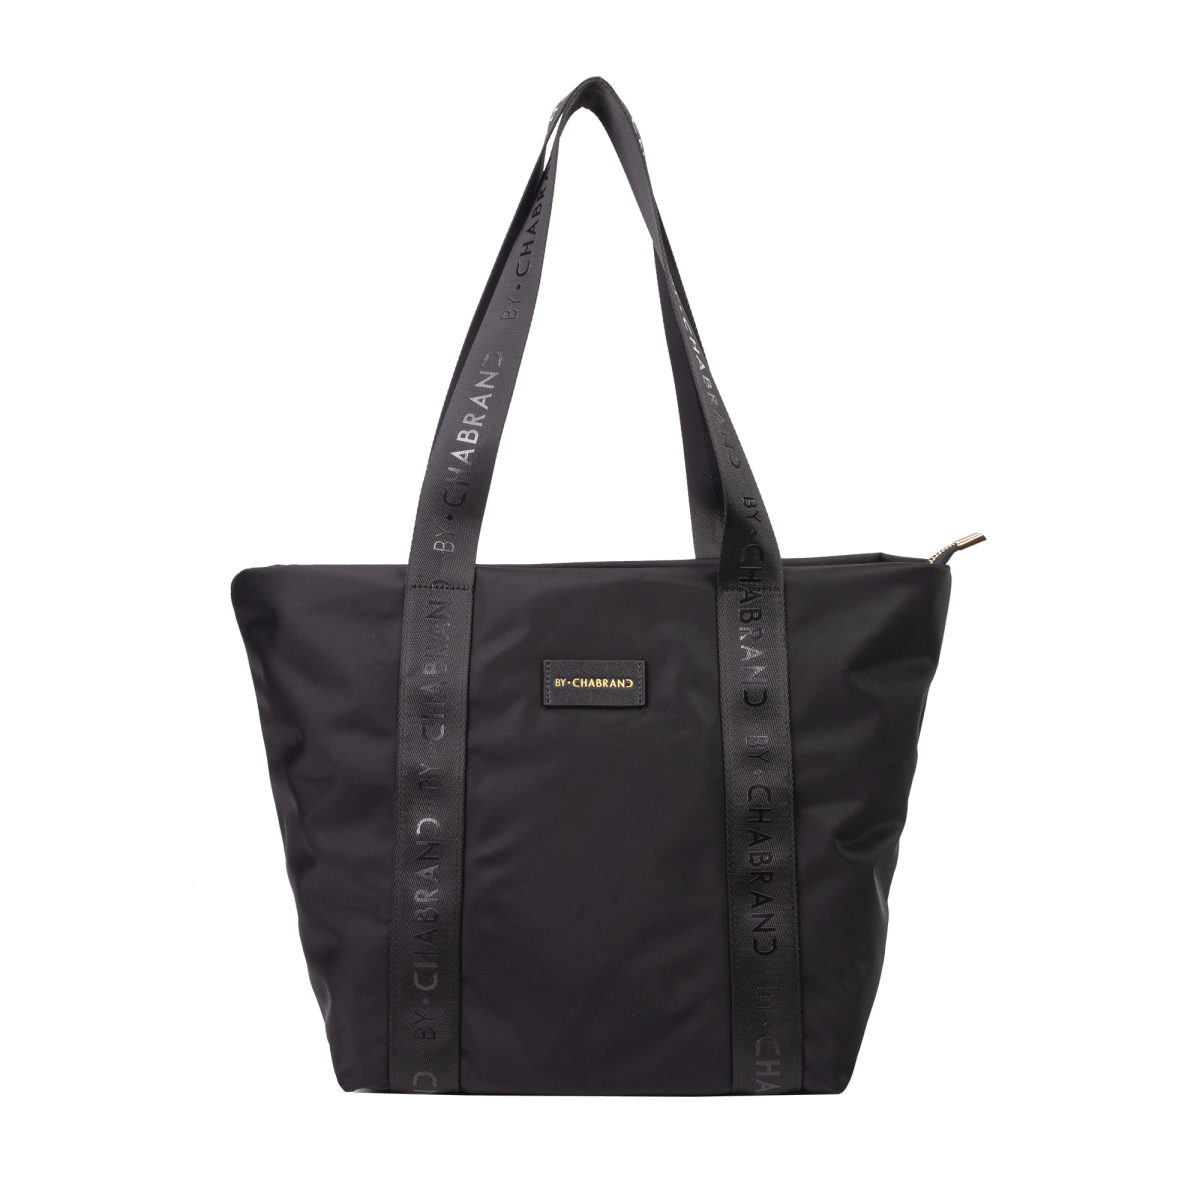 Sac Cabas By Chabrand 11454110 Noir